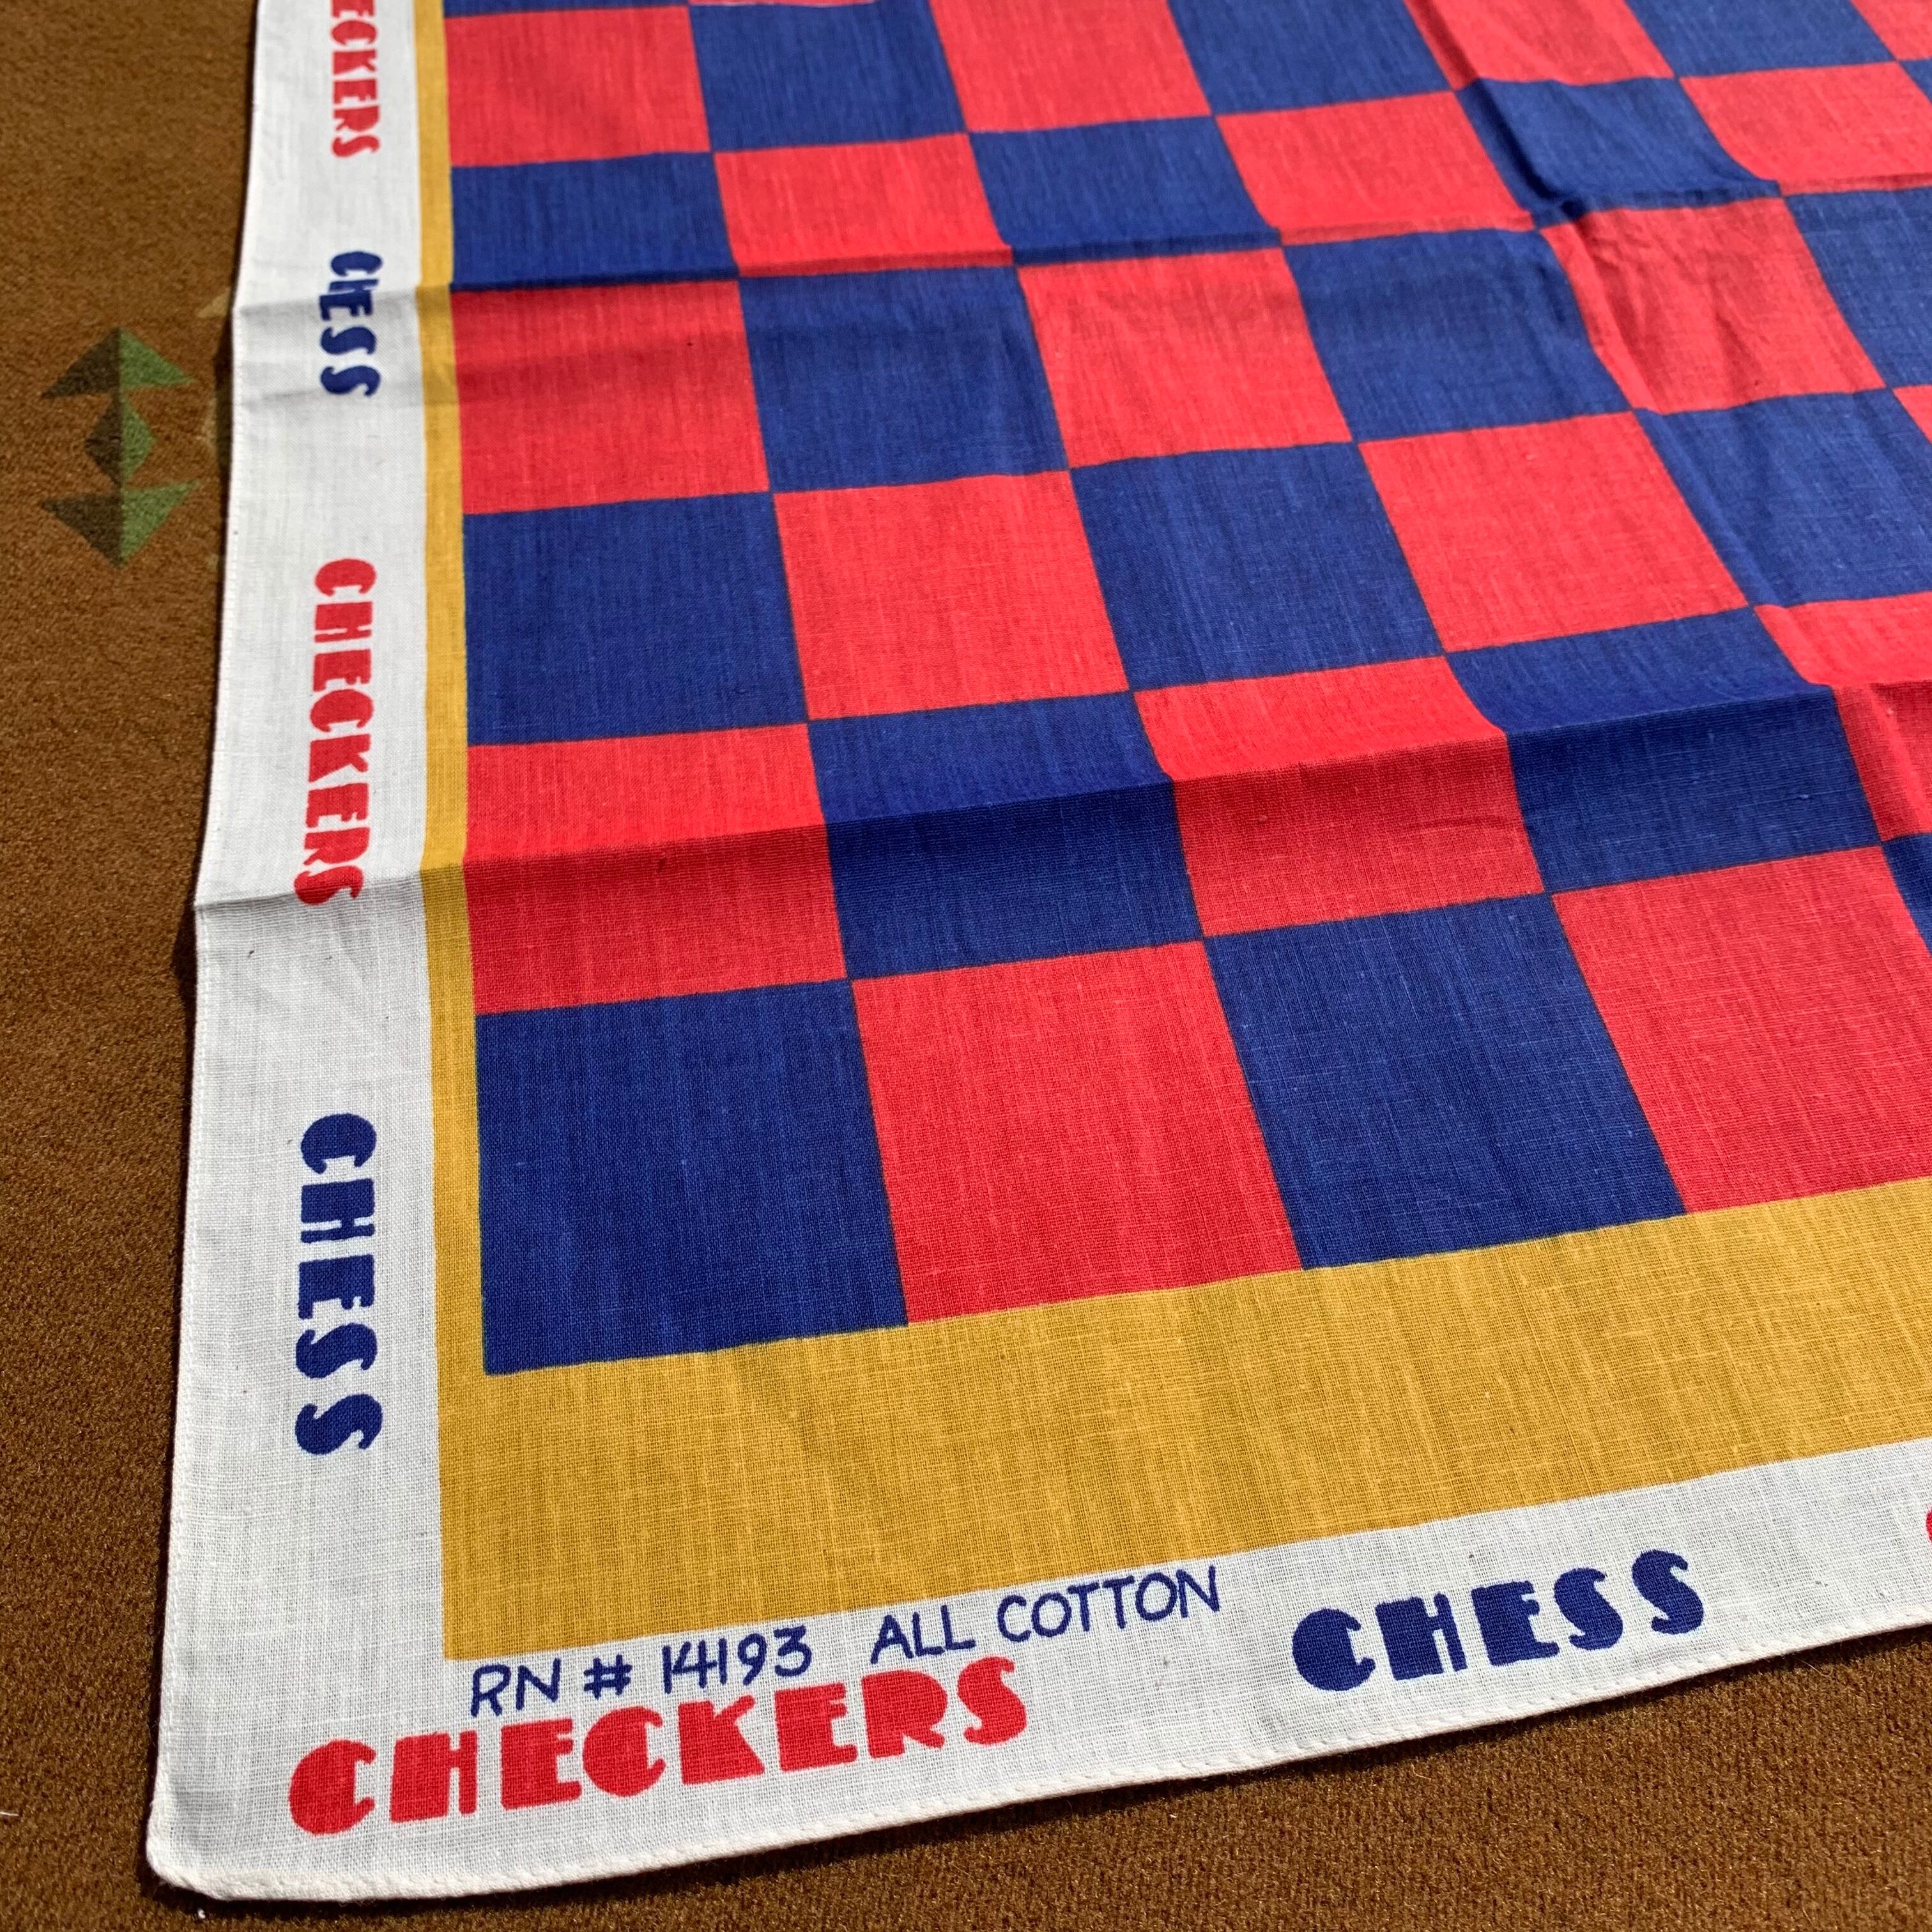 1960-70s Deadstock “Checkers Chess Bandana” | Rei-mart powered by BASE